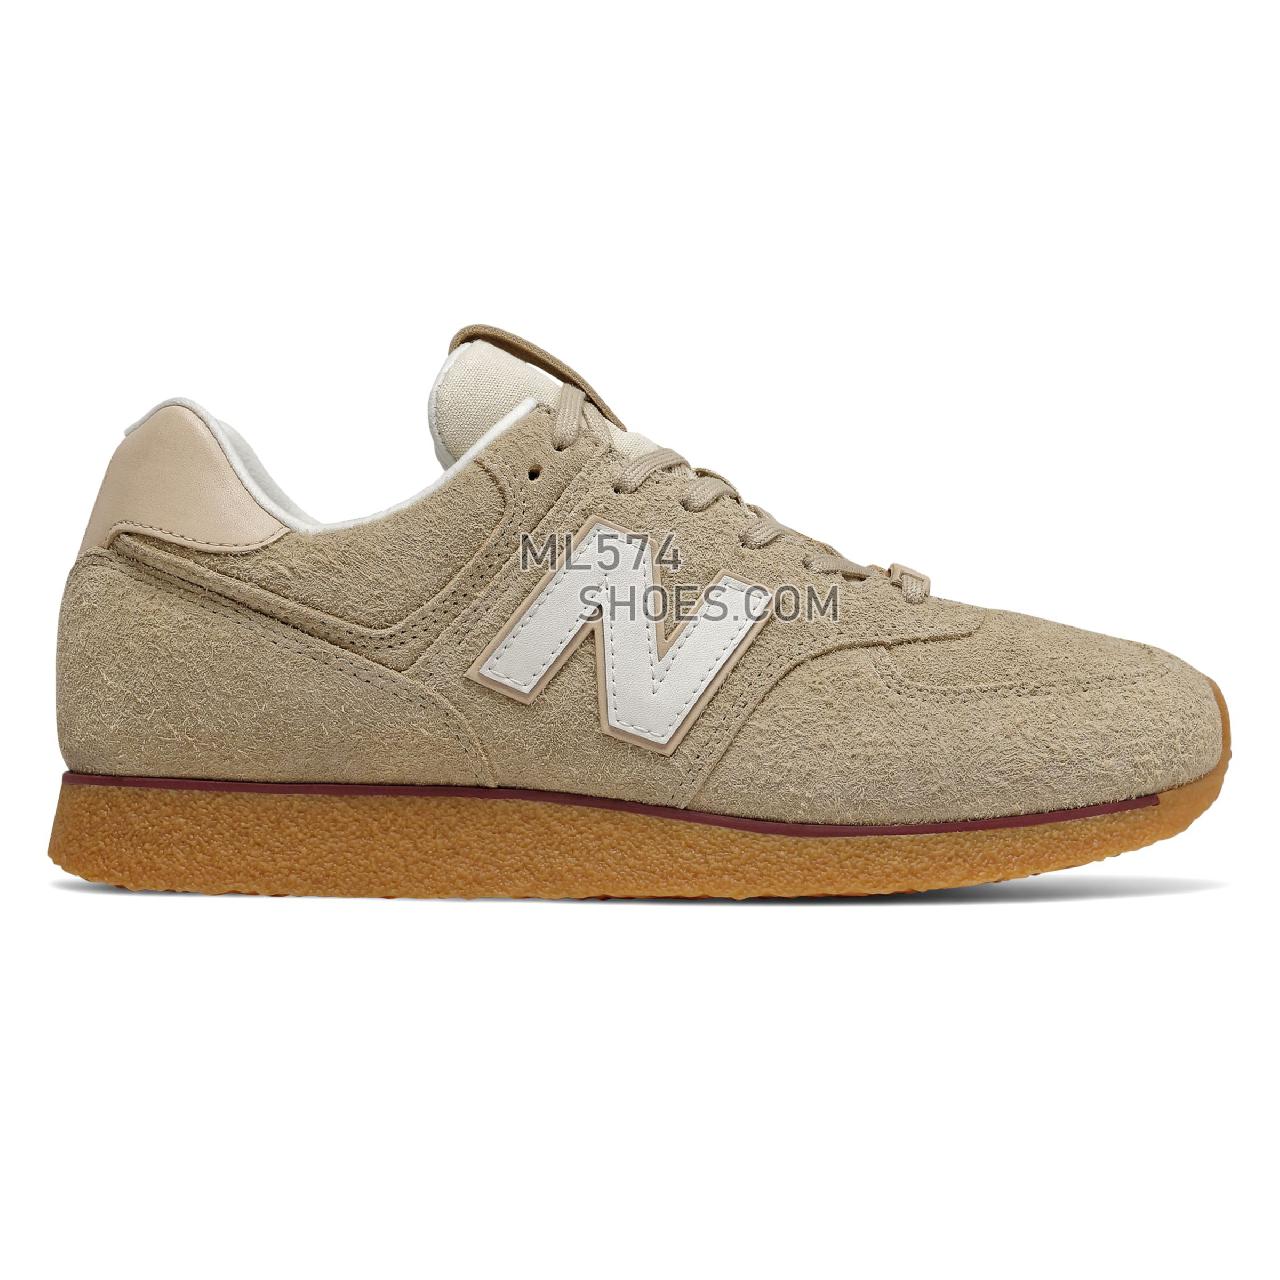 New Balance 574A - Men's Classic Sneakers - Incense with Veg Tan - ML574ANB